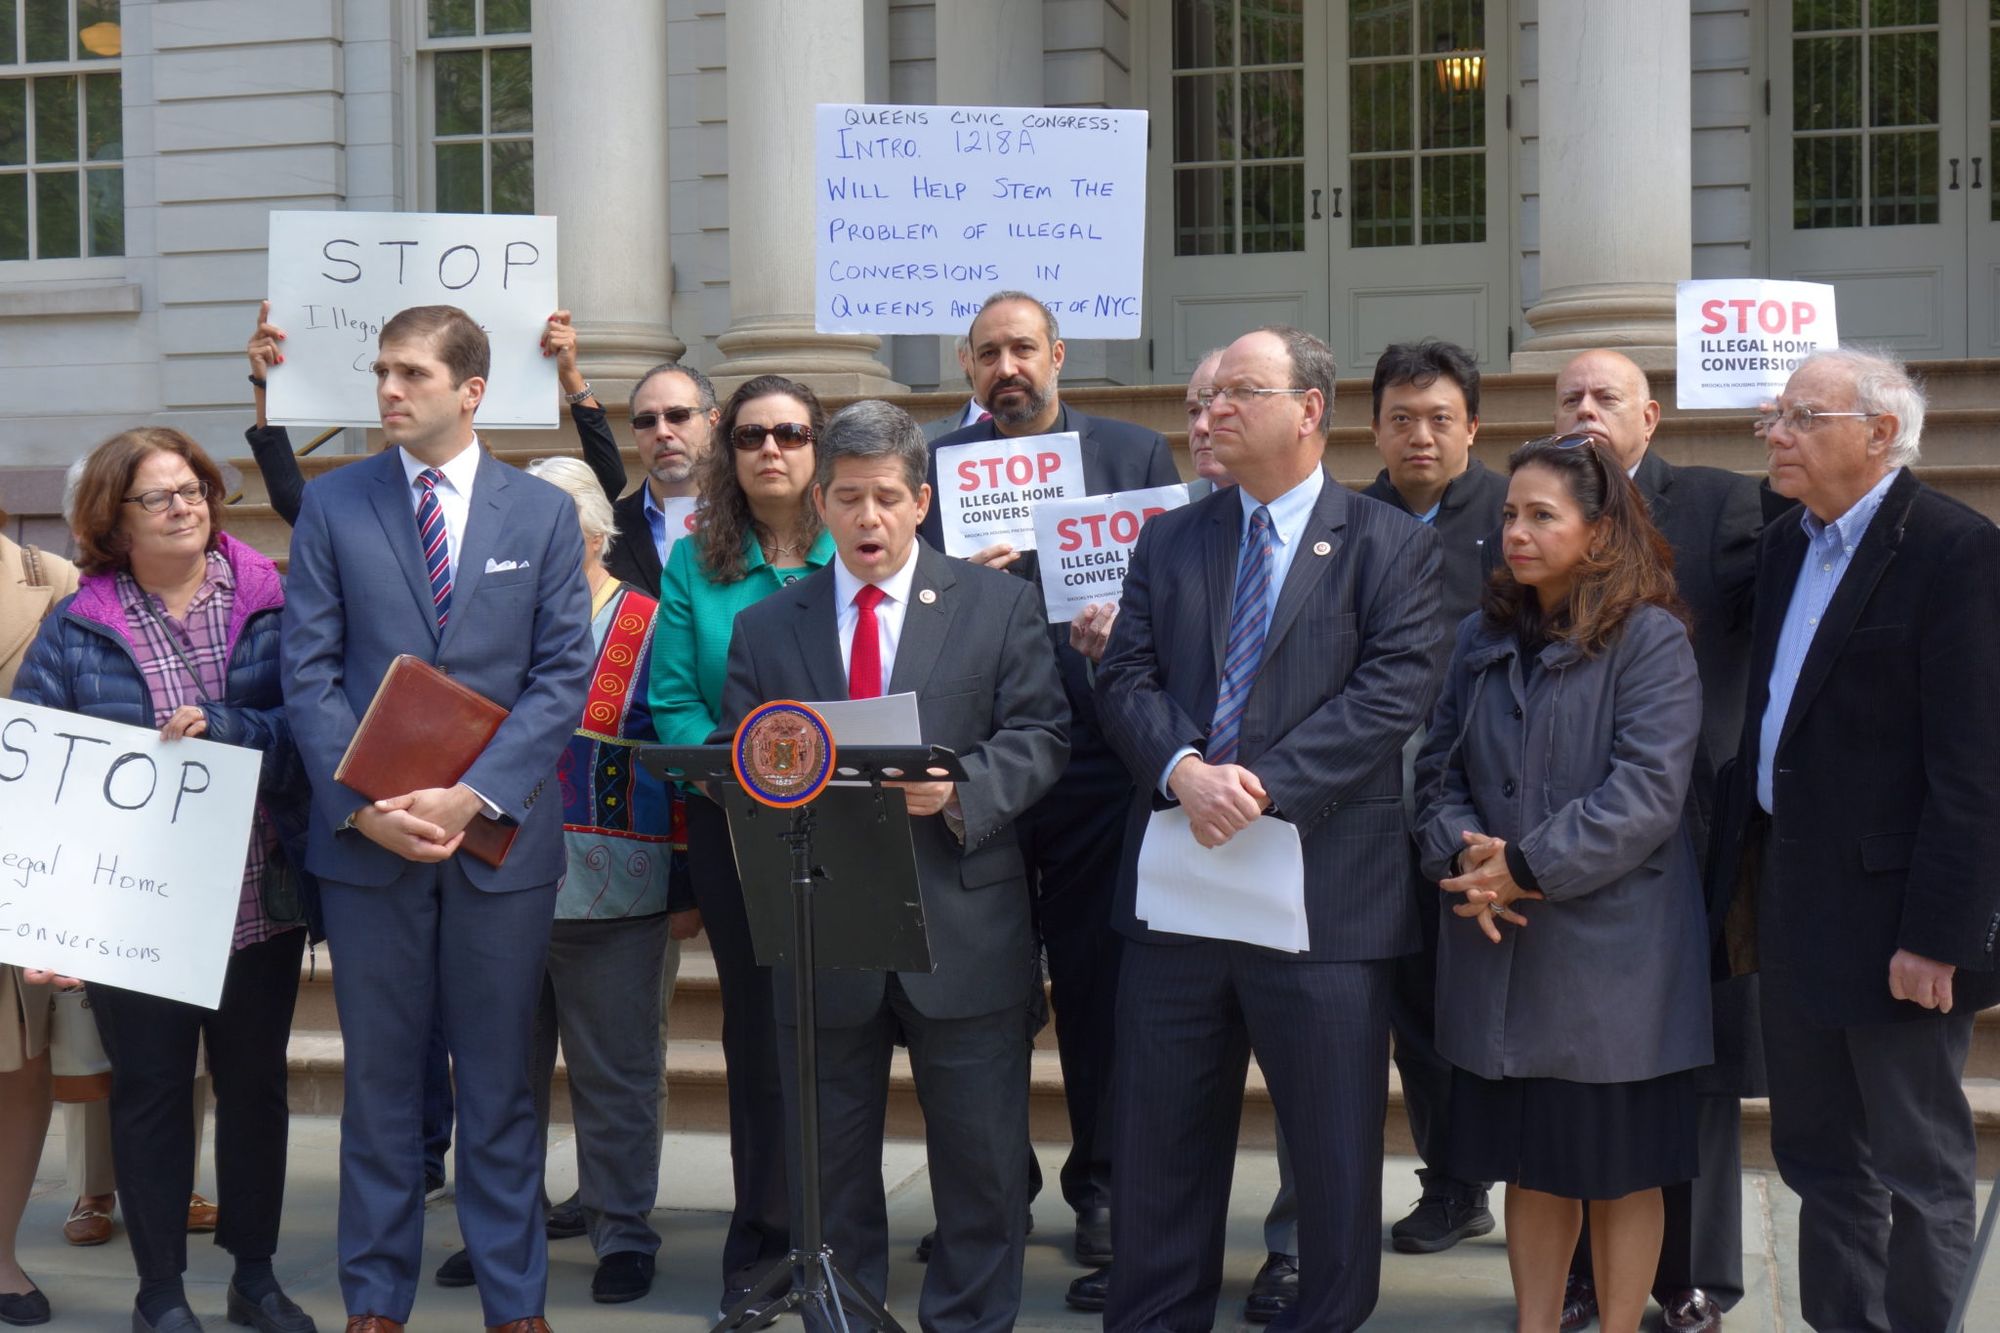 City Council Votes To Combat Illegal Home Conversions Plaguing Southern Brooklyn